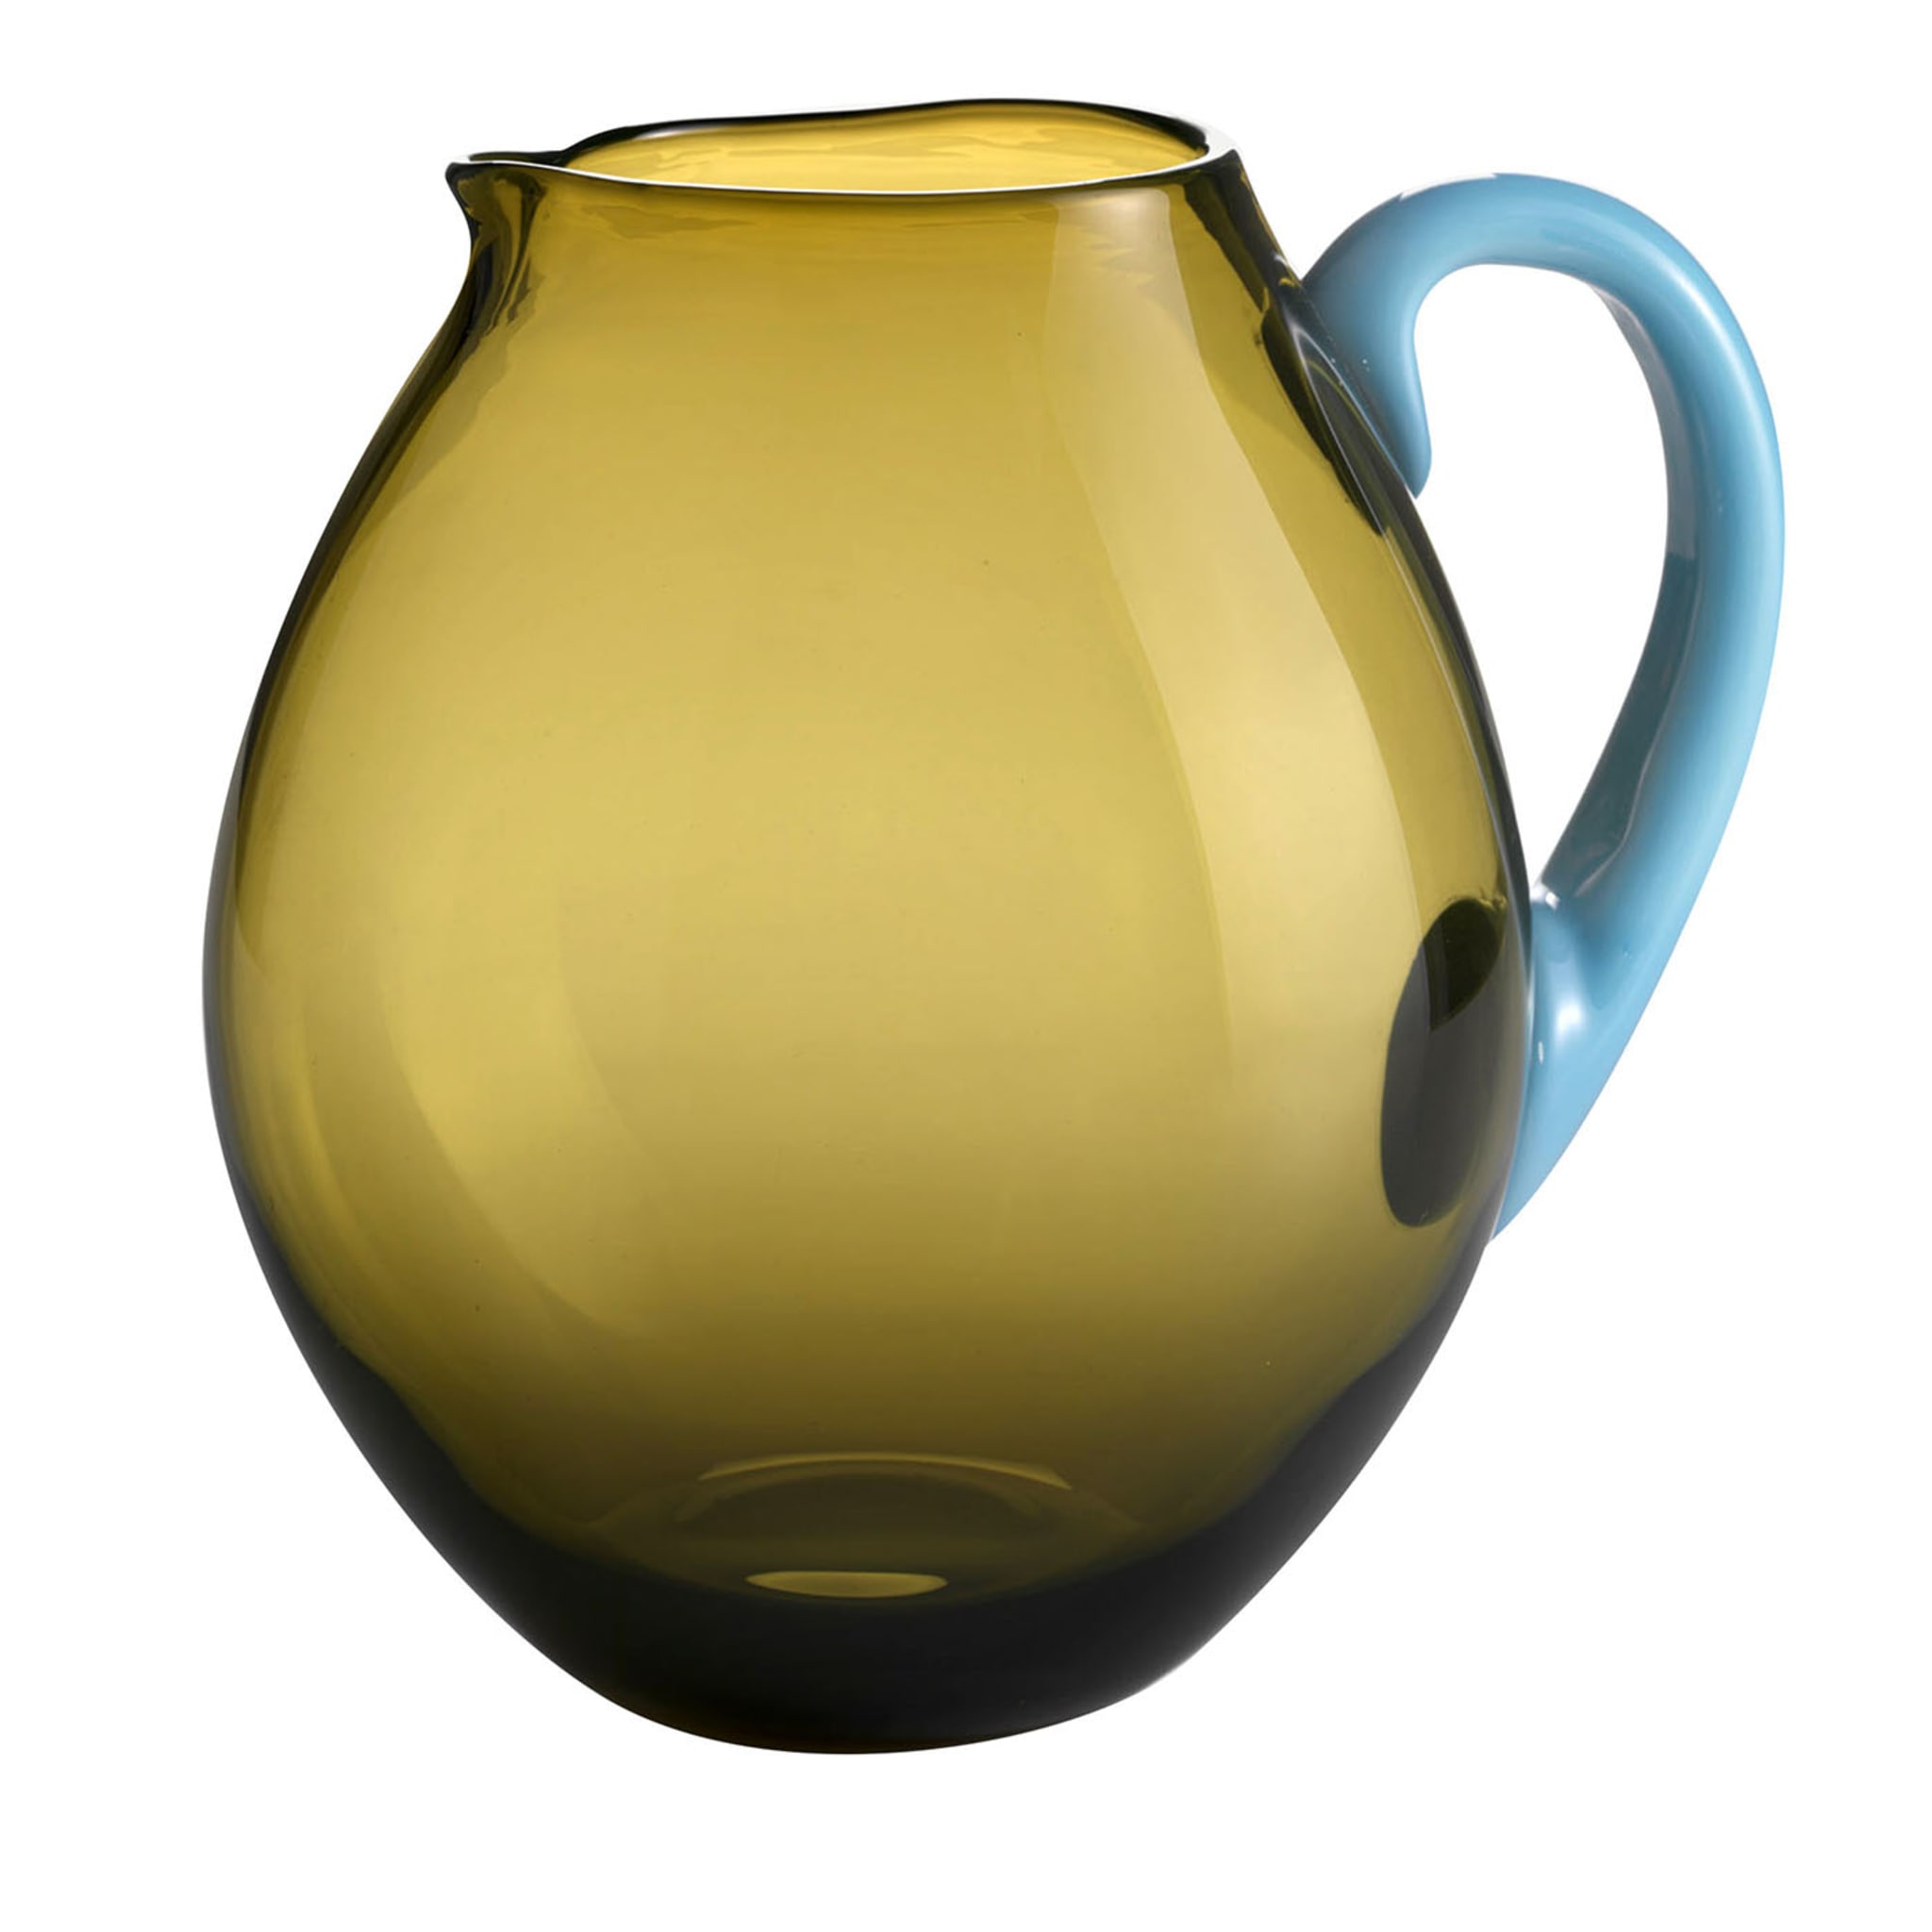 Dandy Acid-Green & Light-Blue Pitcher by Stefano Marcato - Main view